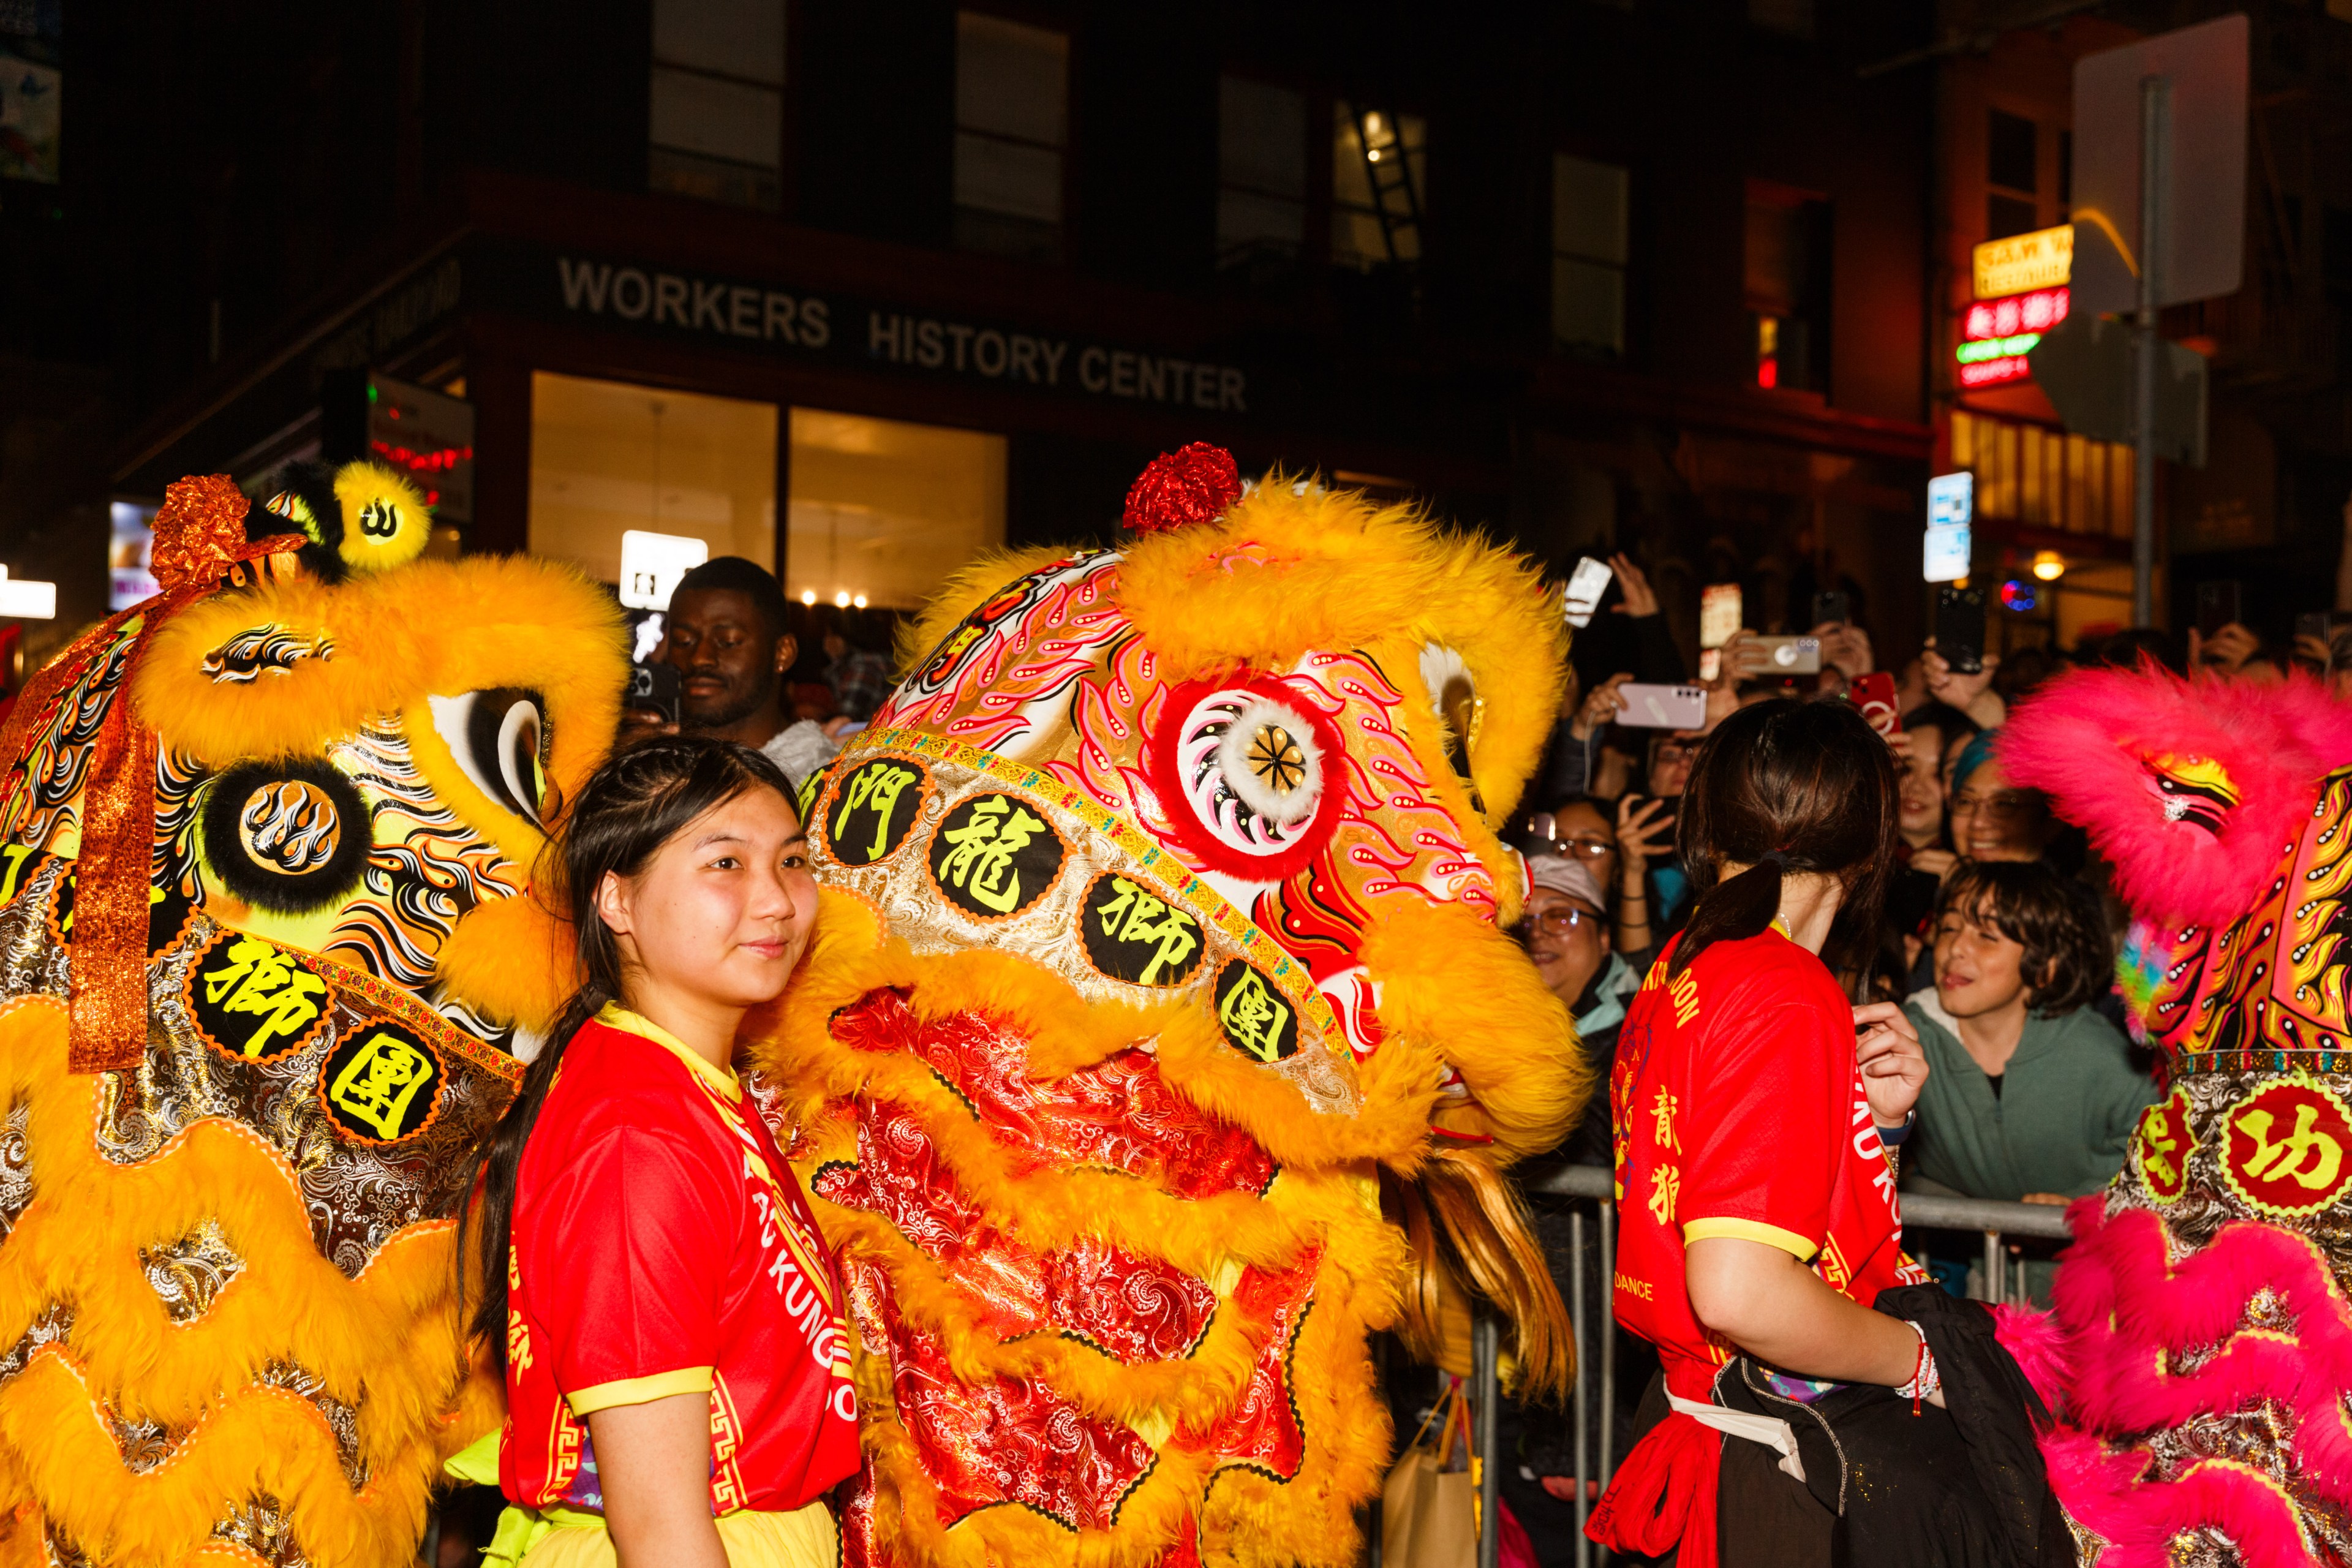 People in red shirts participate in a lion dance, surrounded by a crowd at night.